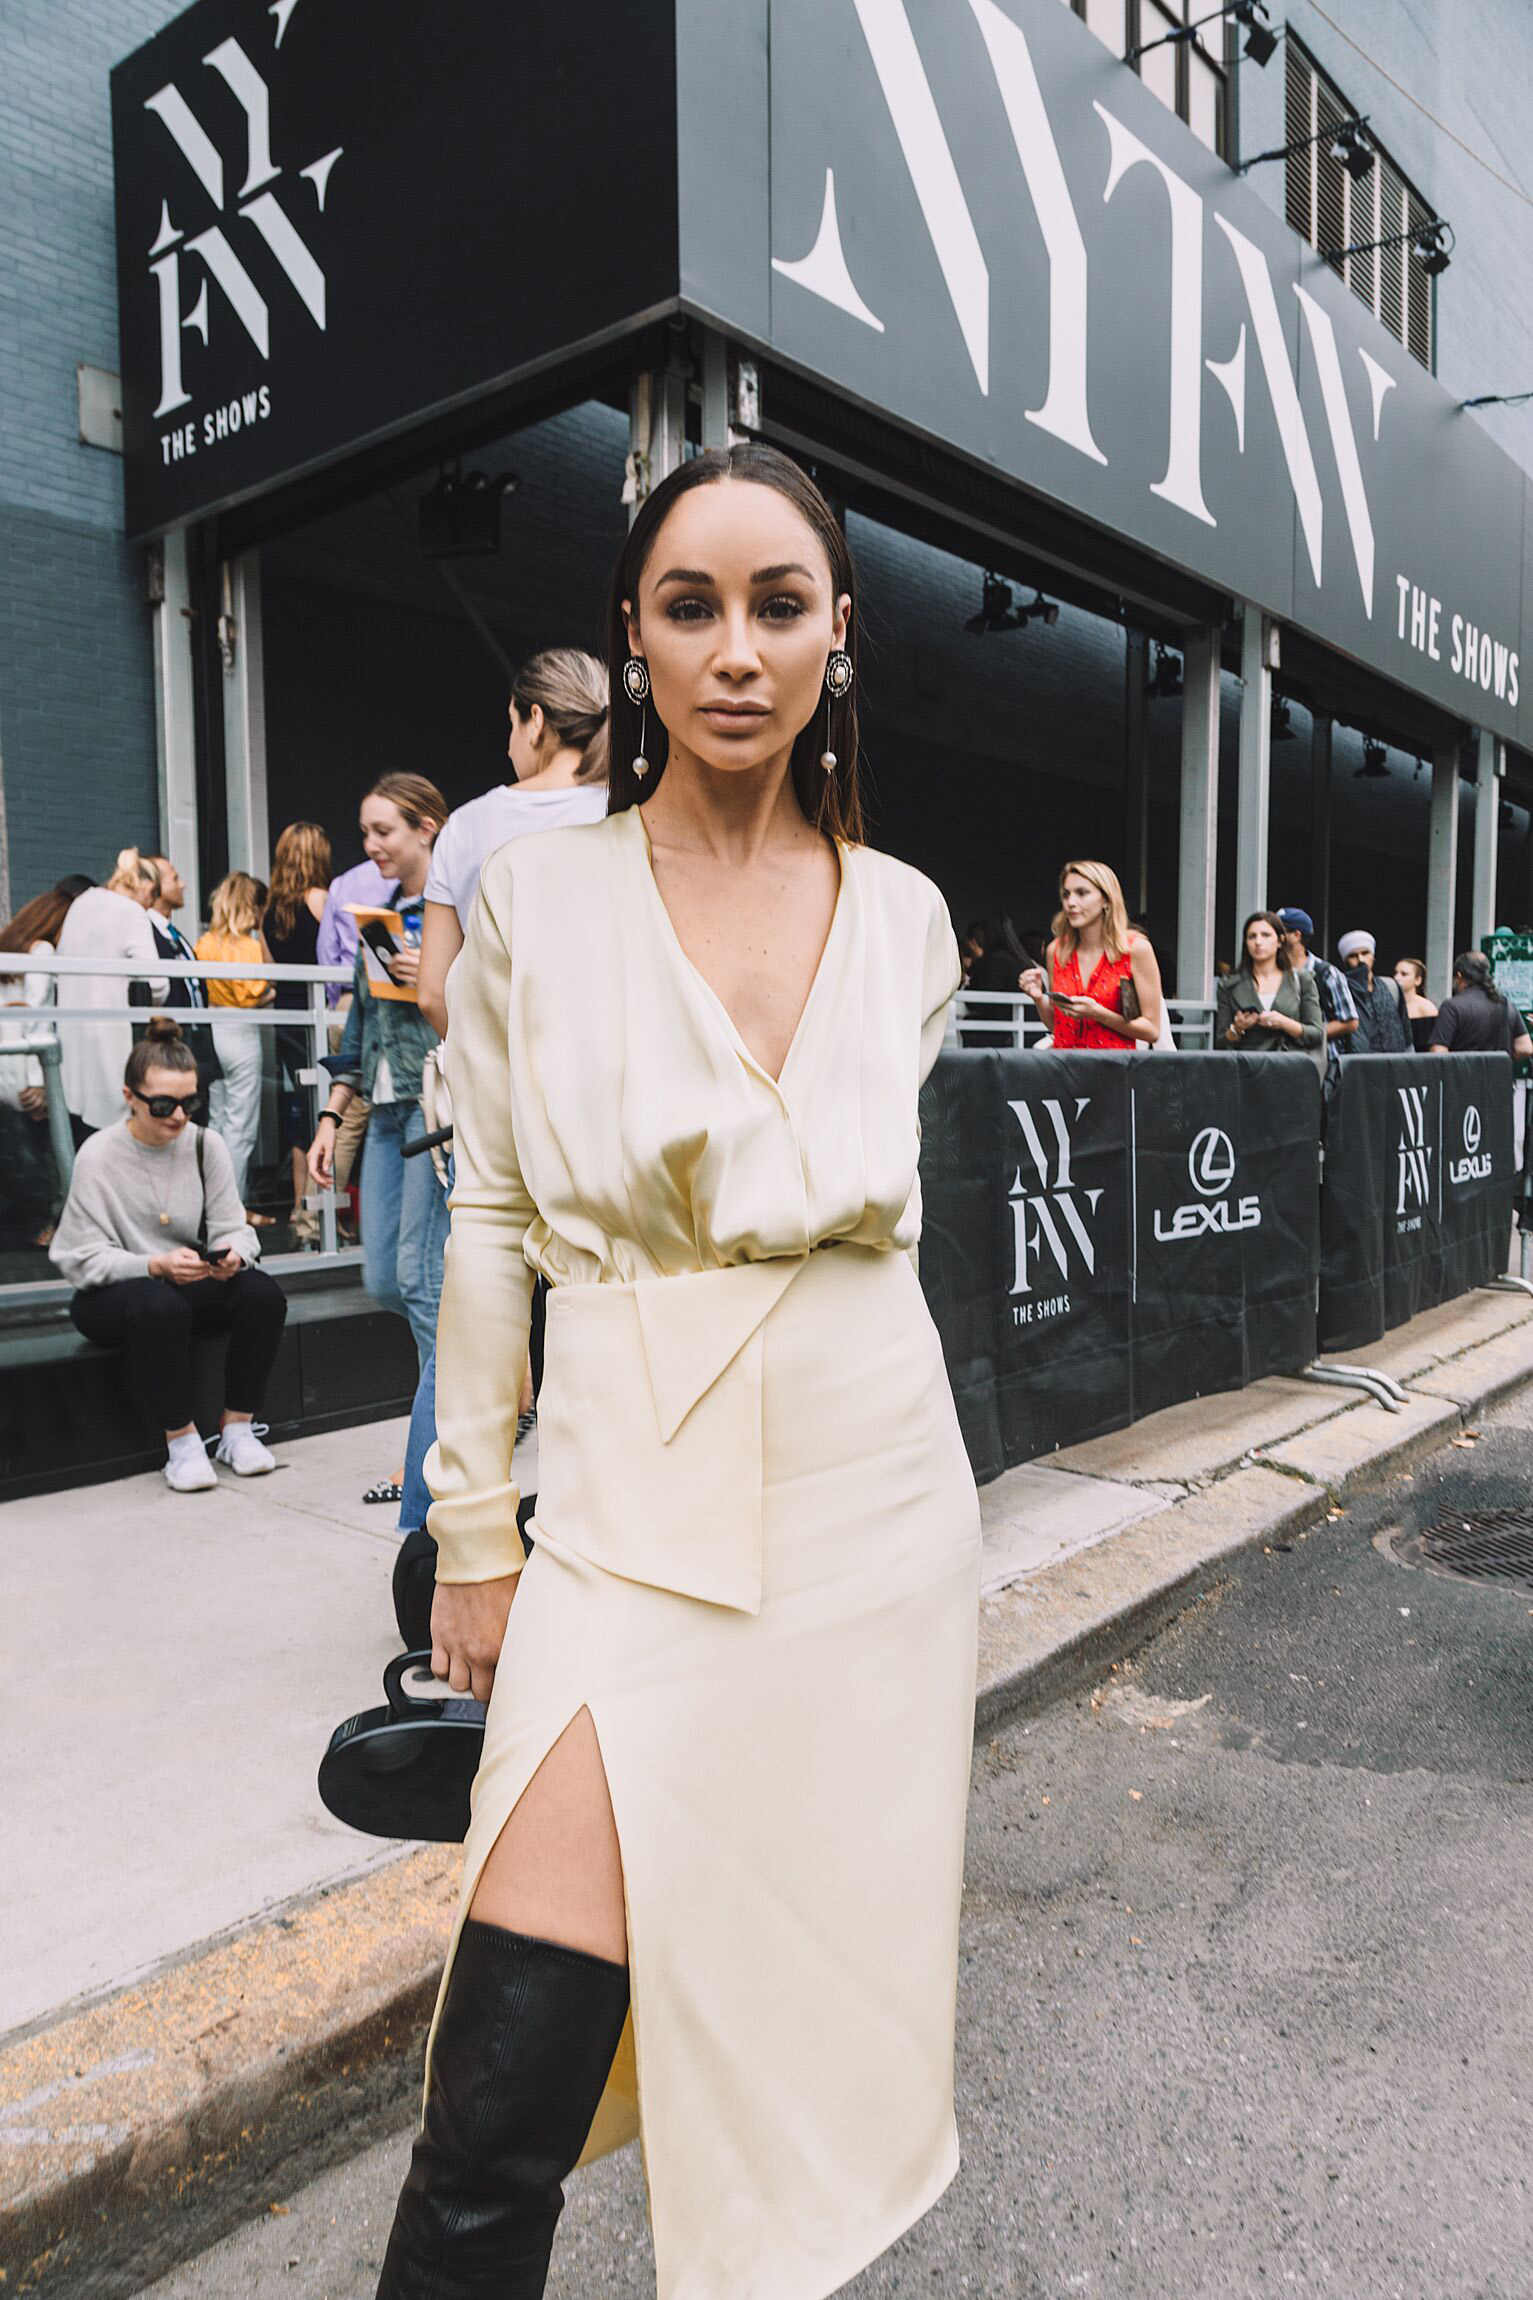 PHOTO: Actress, fashionista and Instagram influencer Cara Santana is pictured here.